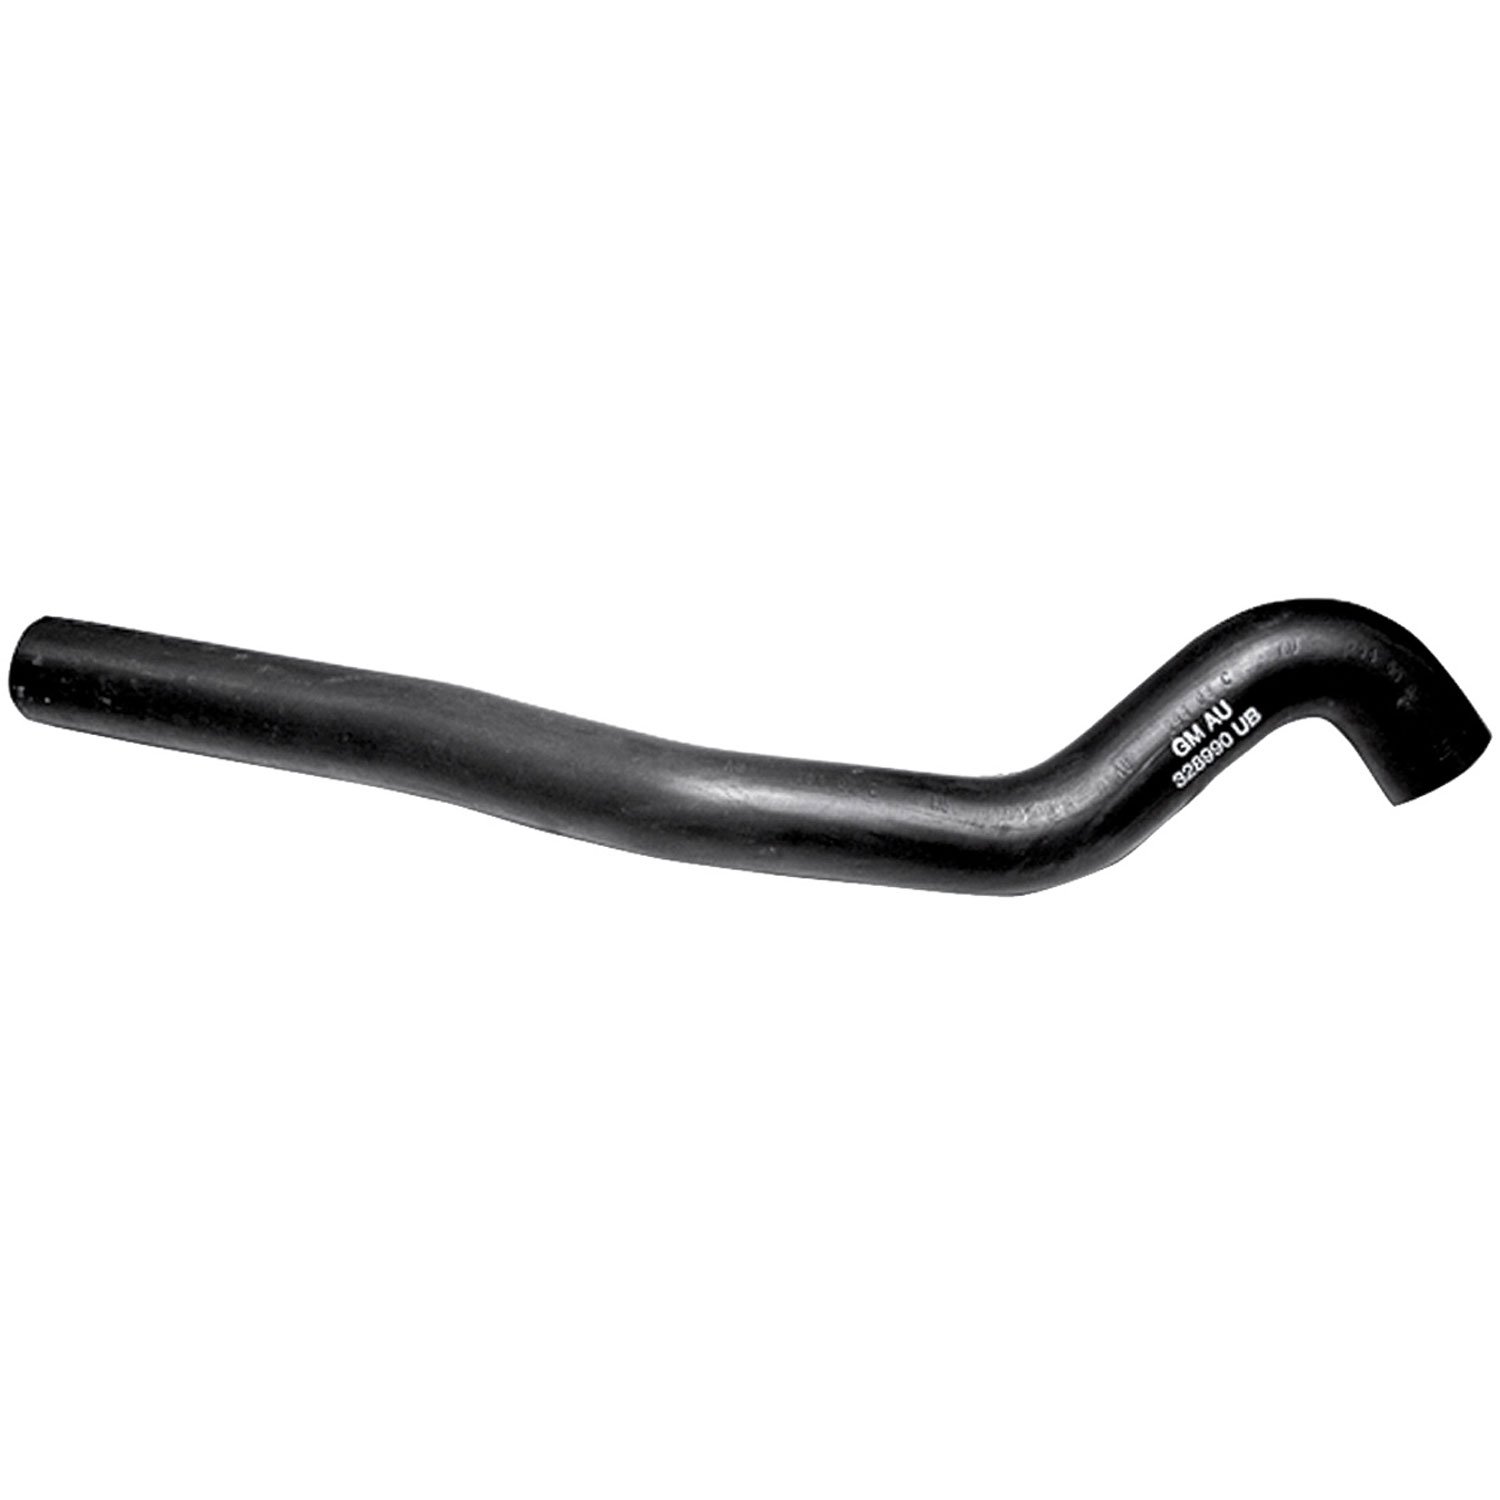 Radiator Hose for 1973-1975 Chevy Chevelle, El Camino with 454 [Upper]